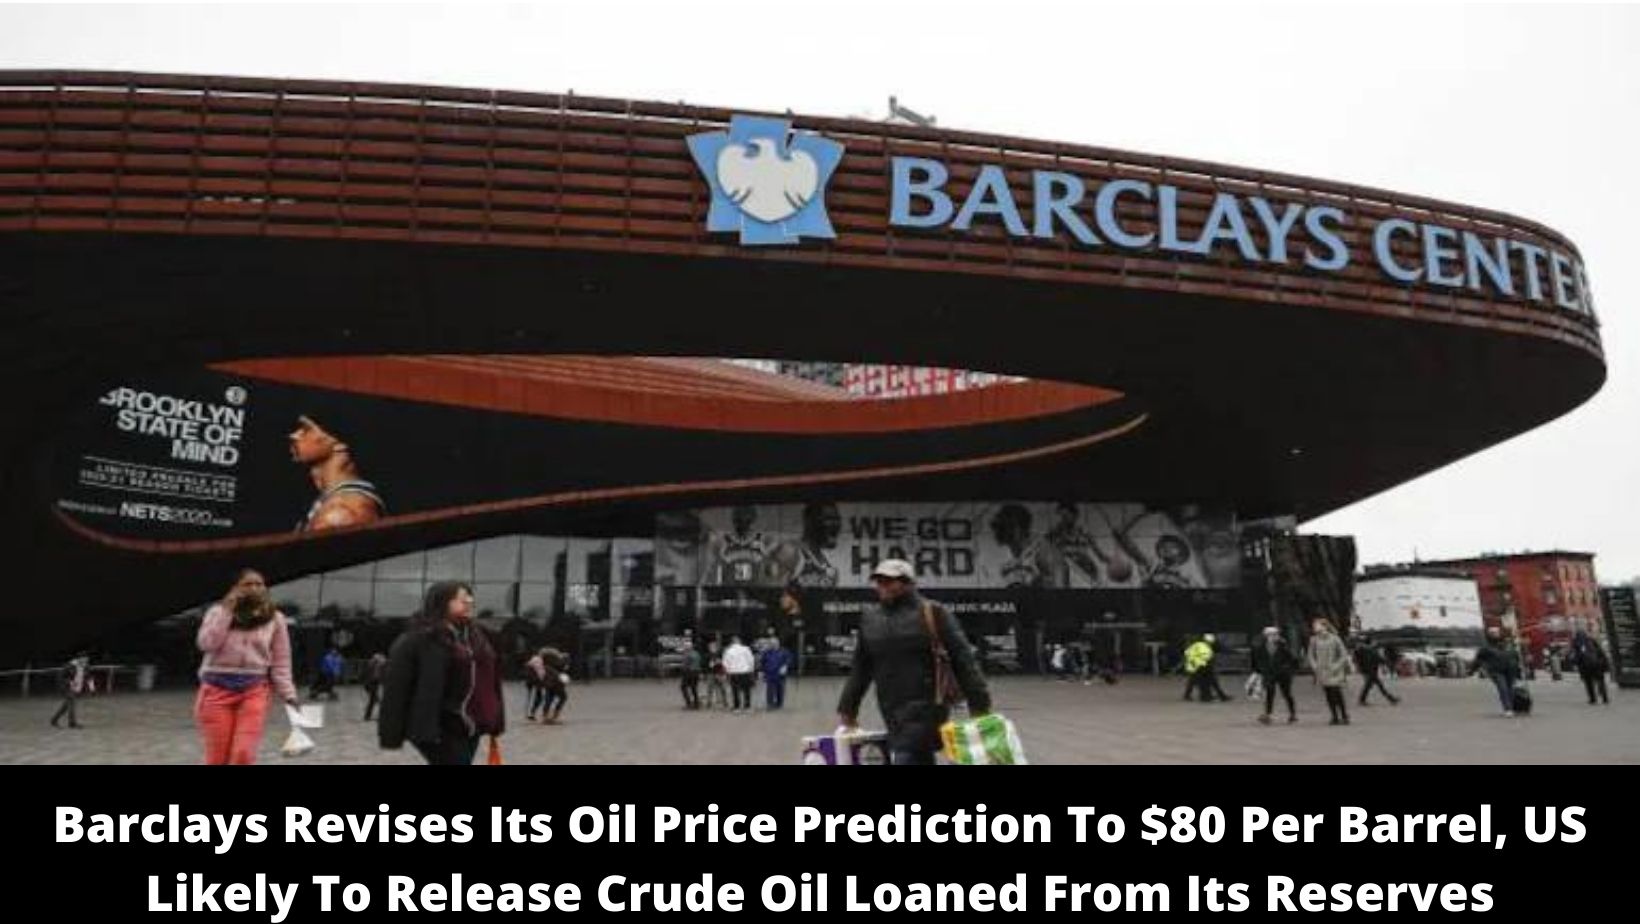 Barclays Revises Its Oil Price Prediction To $80 Per Barrel, US Likely To Release Crude Oil Loaned From Its Reserves